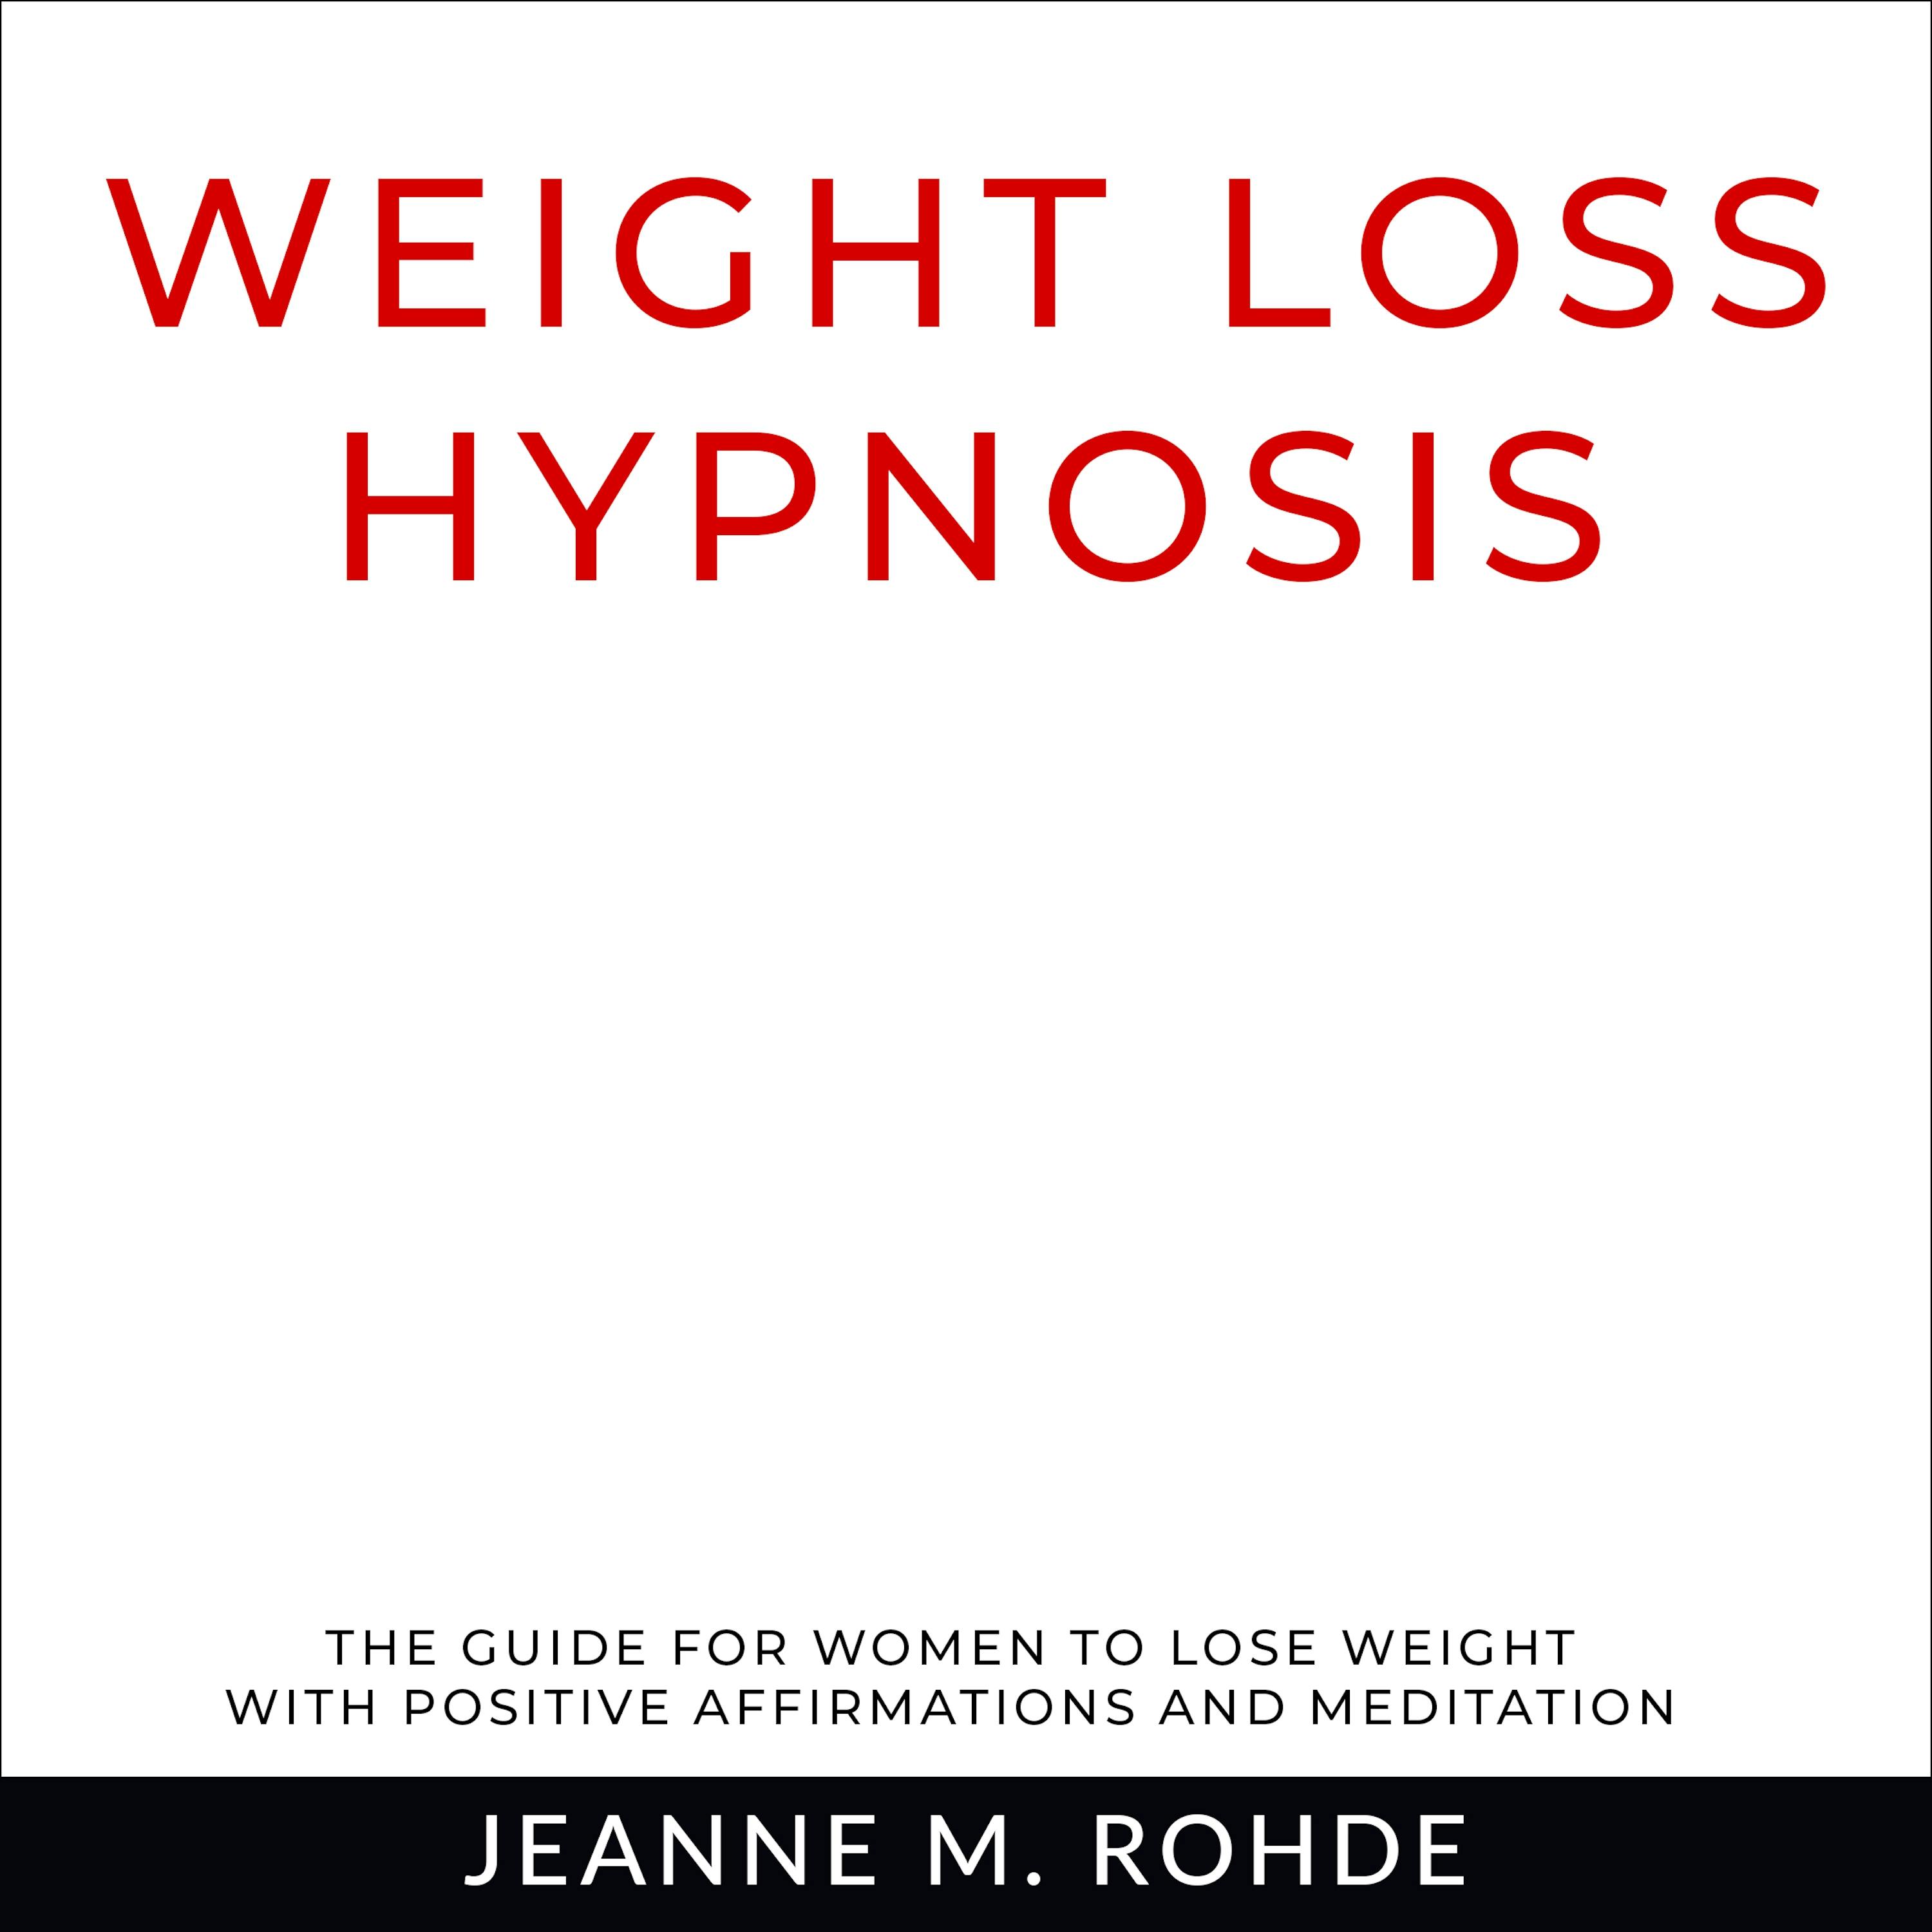 Weight Loss Hypnosis: The guide for women to lose weight with positive affirmations and meditation - Jeanne M. Rohde